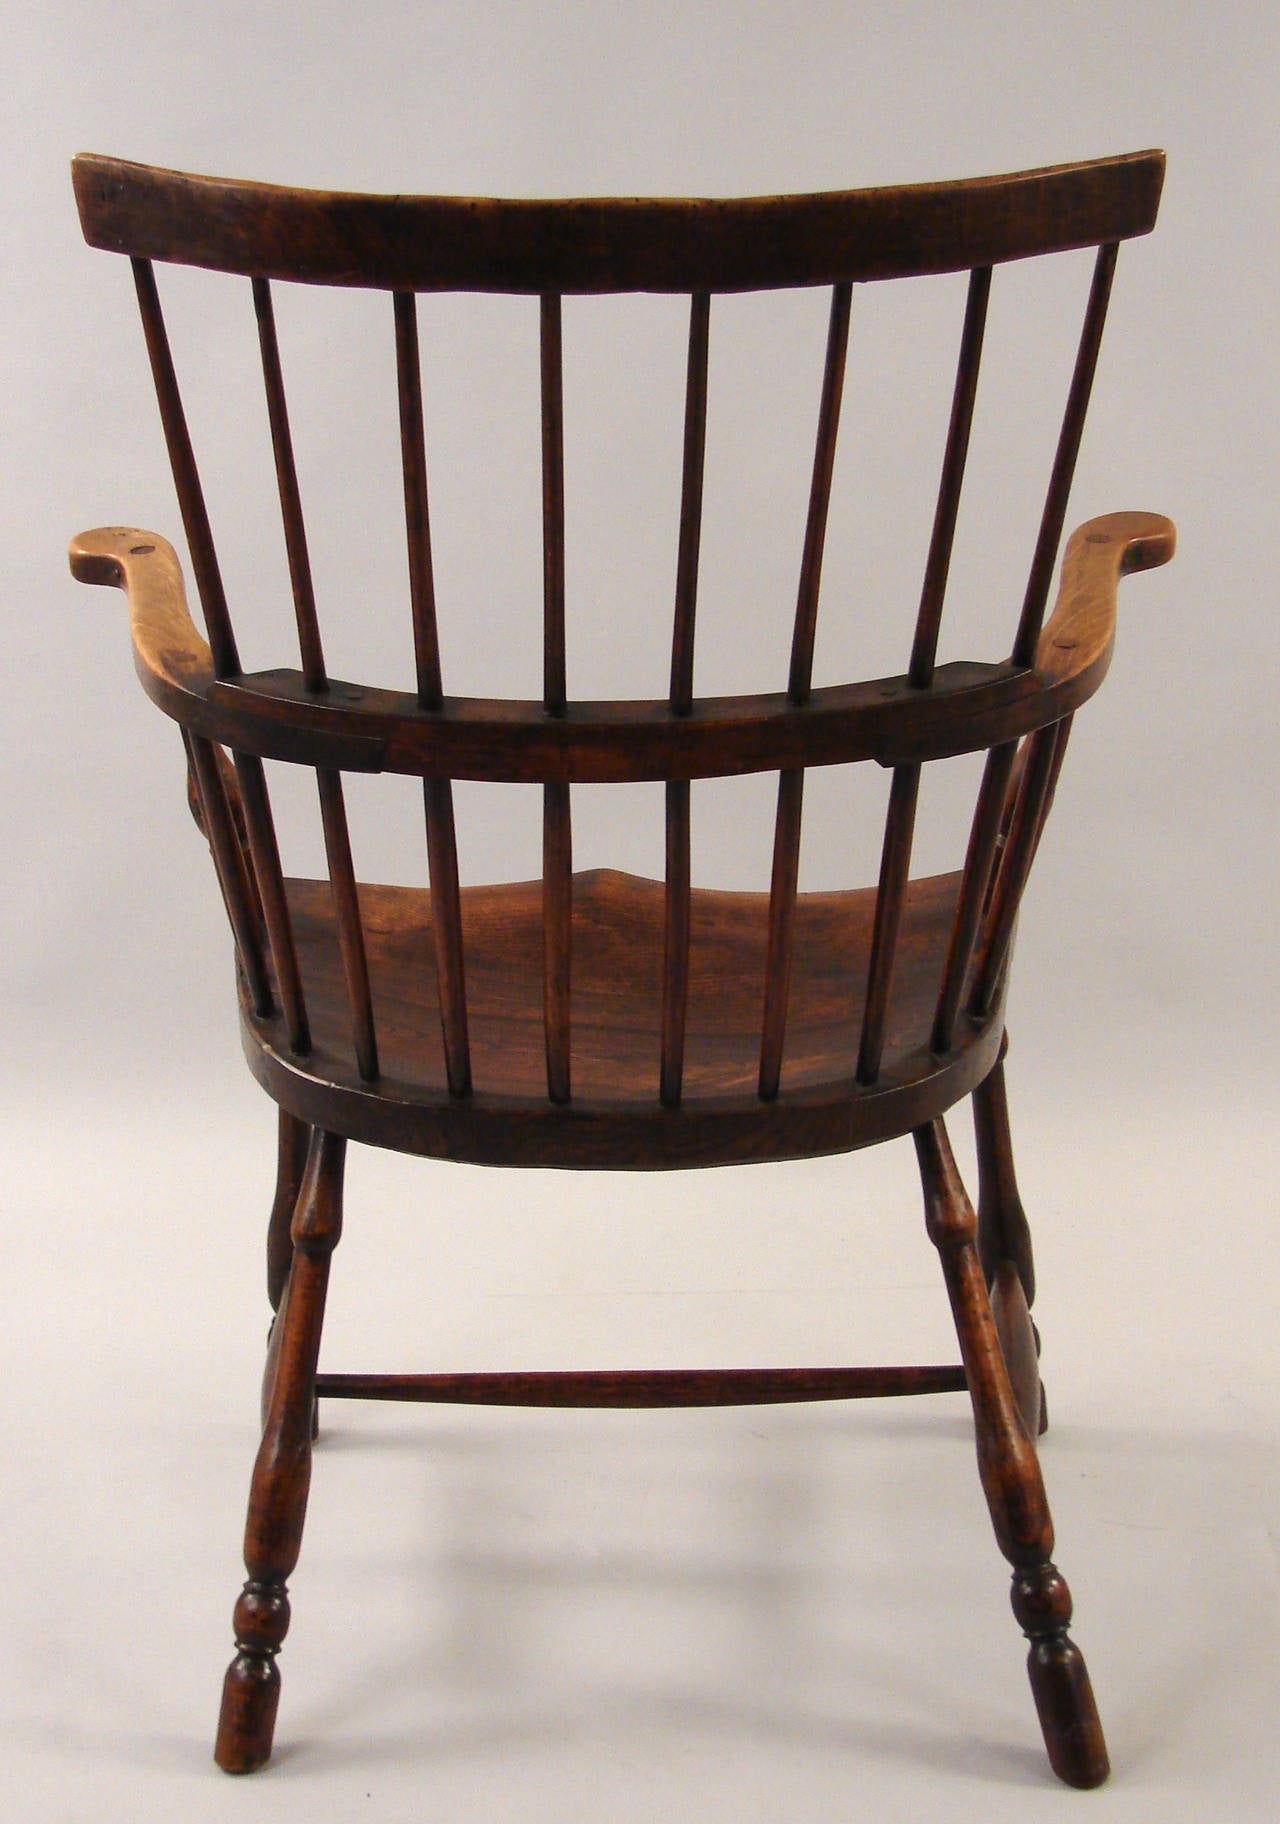 Great Britain (UK) English Elm and Hickory Comb Back Windsor Armchair